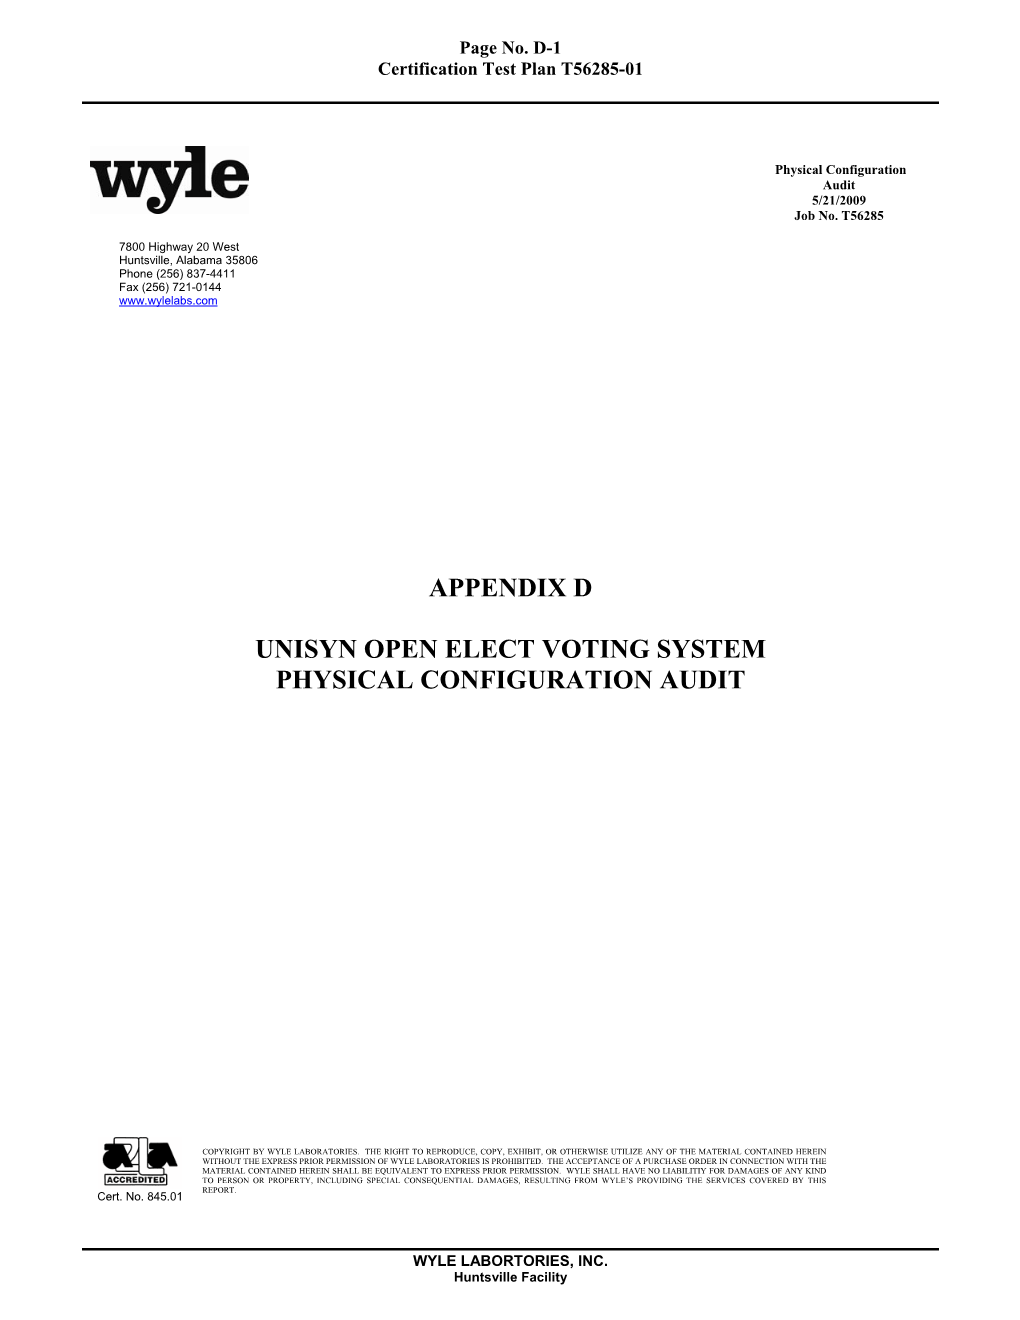 Appendix D Unisyn Open Elect Voting System Physical